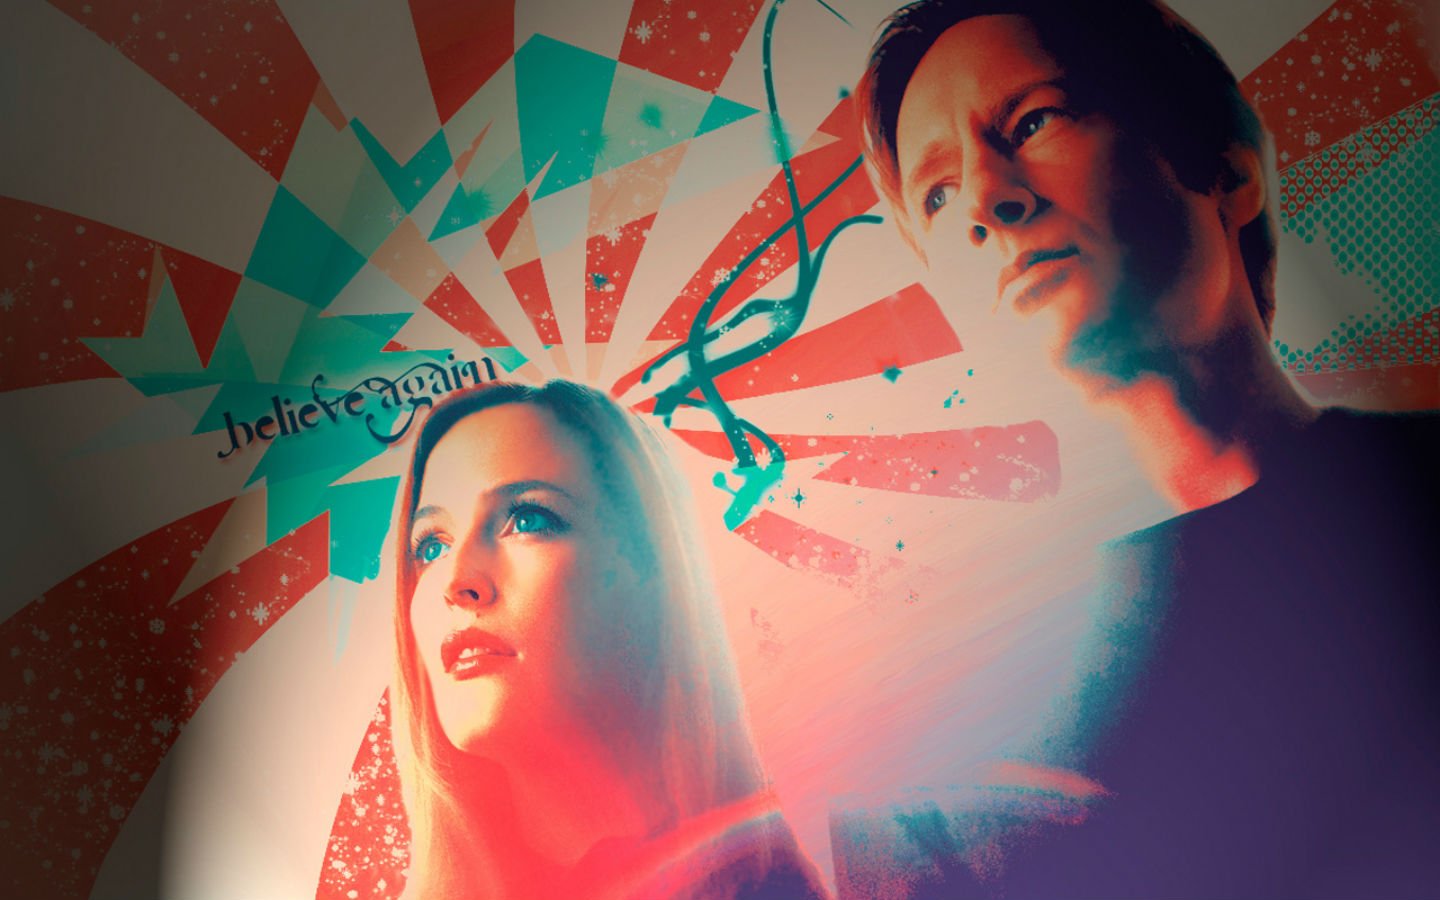 the, X files, Sci fi, Mystery, Drama, Television, Files, Series, Poster, Psychedelic Wallpaper